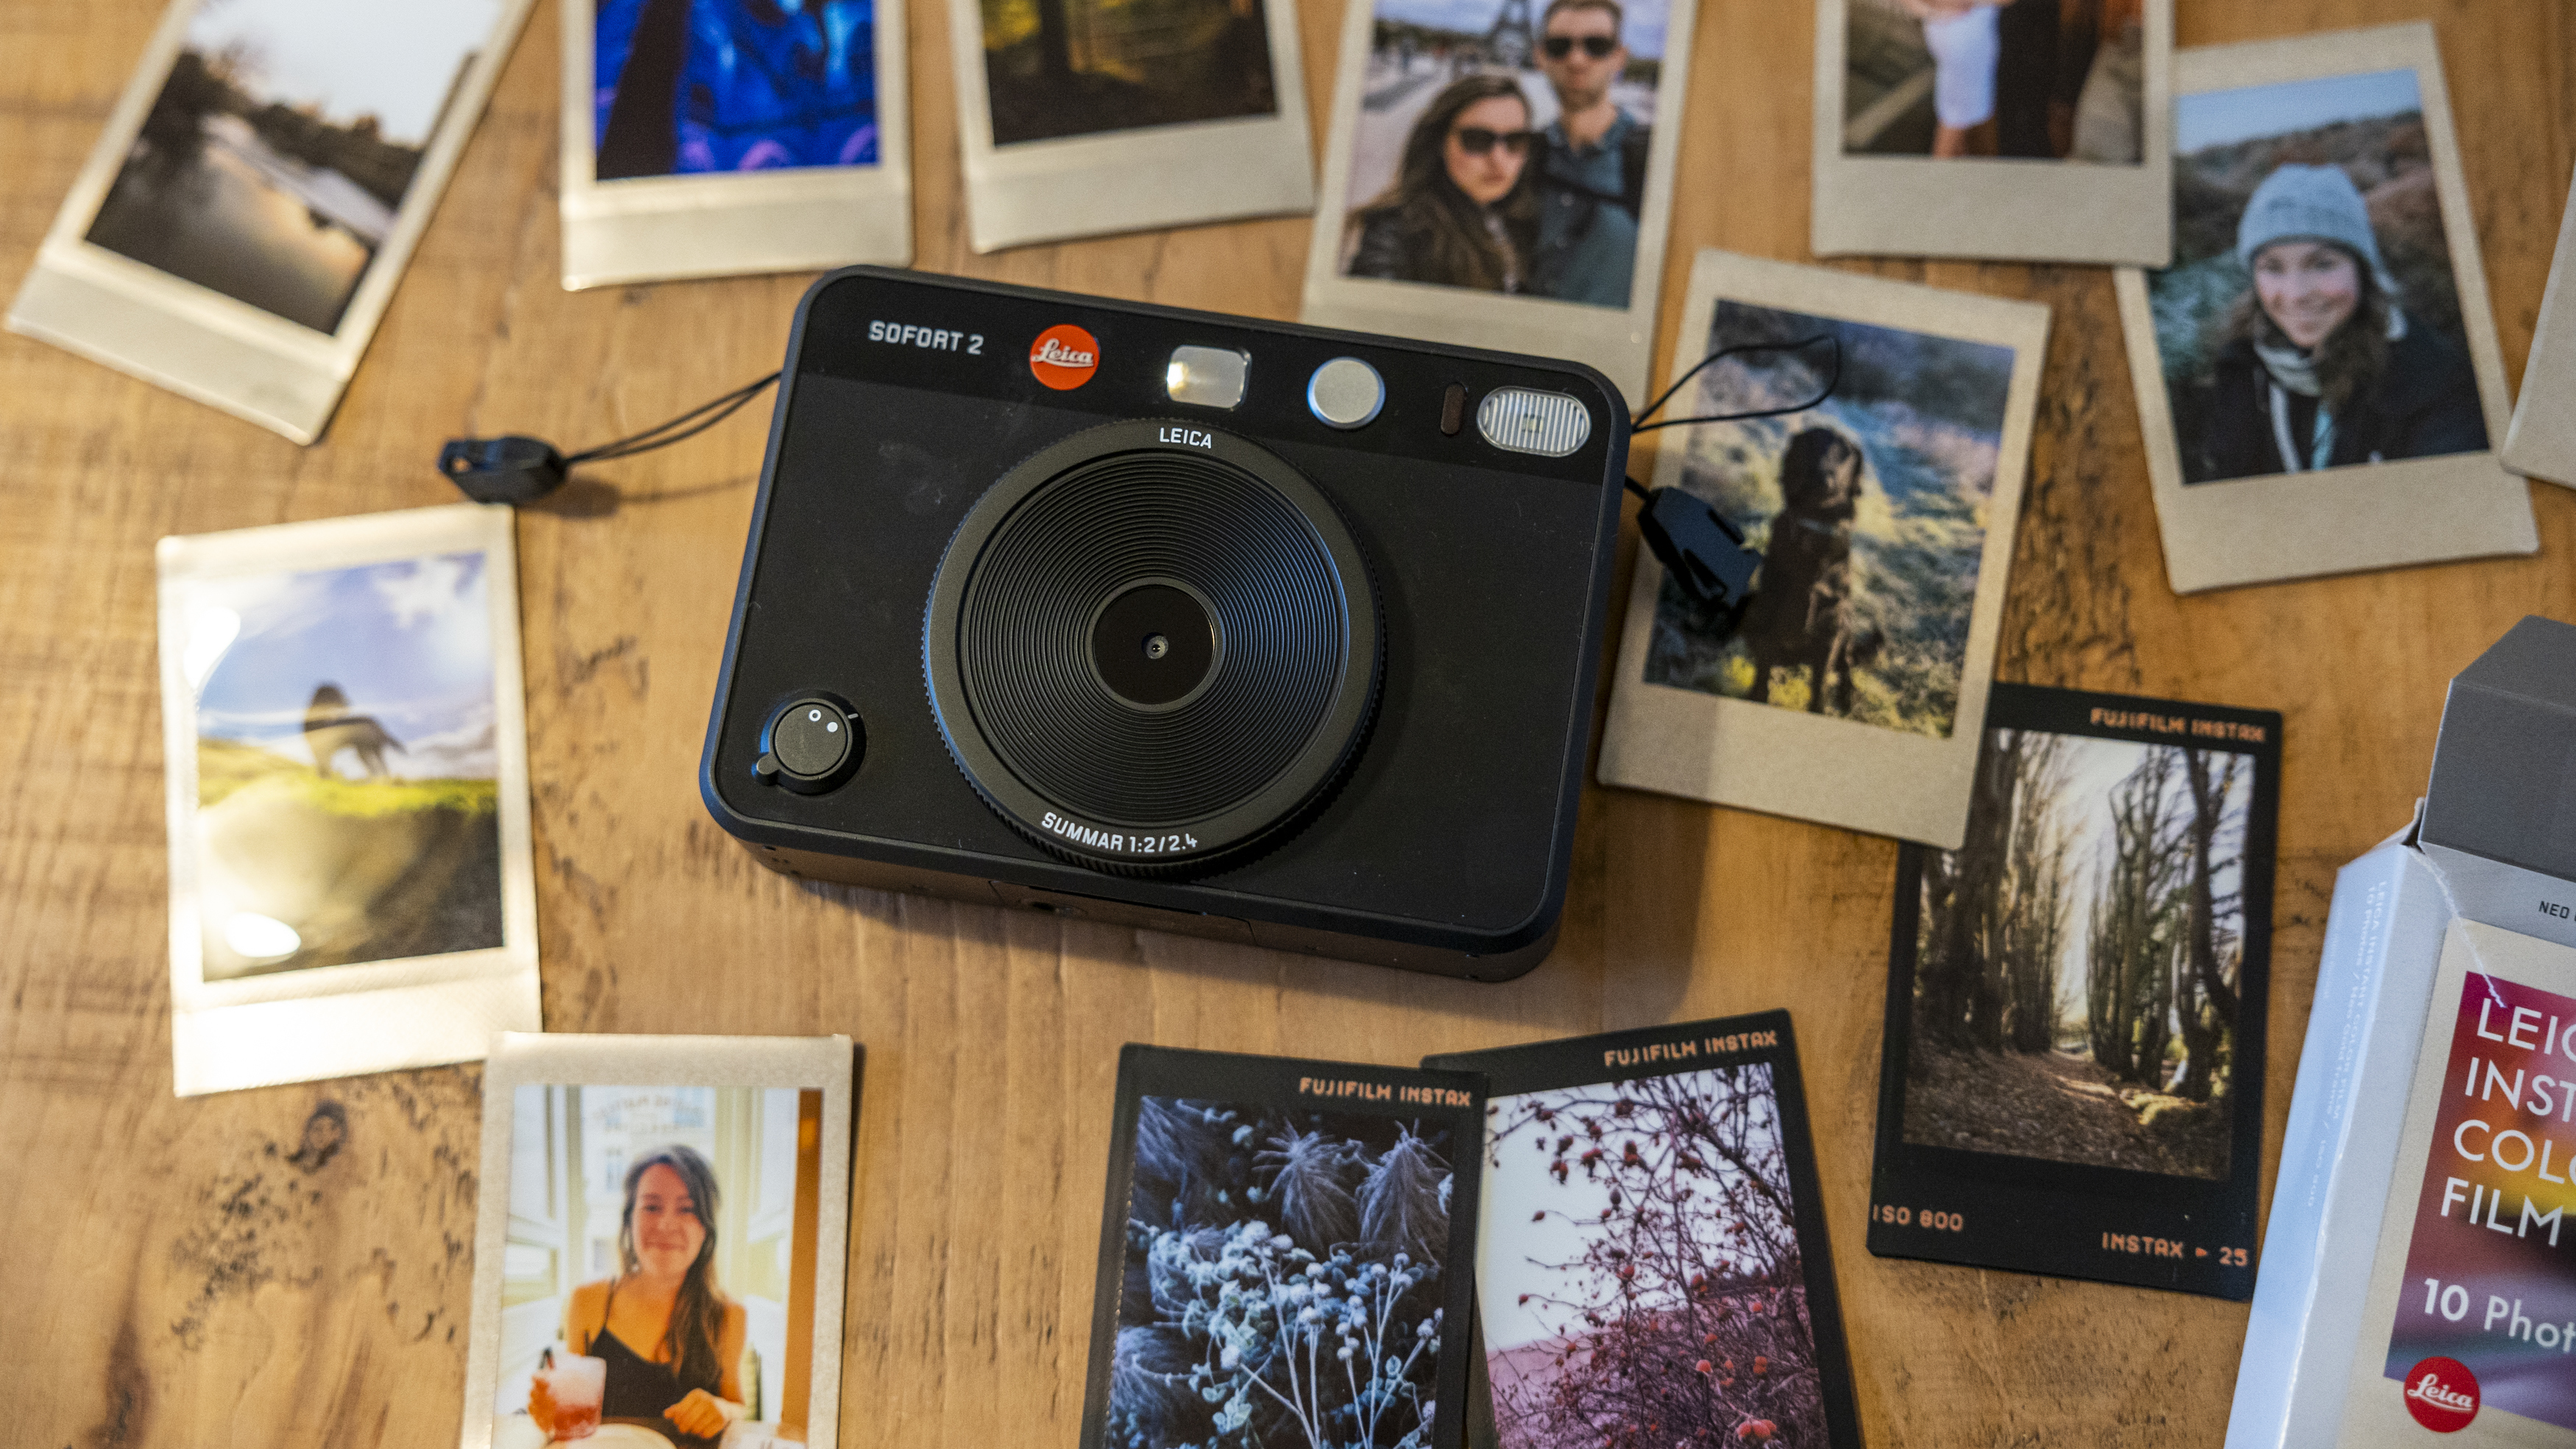 The Leica Sofort 2 on a wooden table surrounded by Instax prints